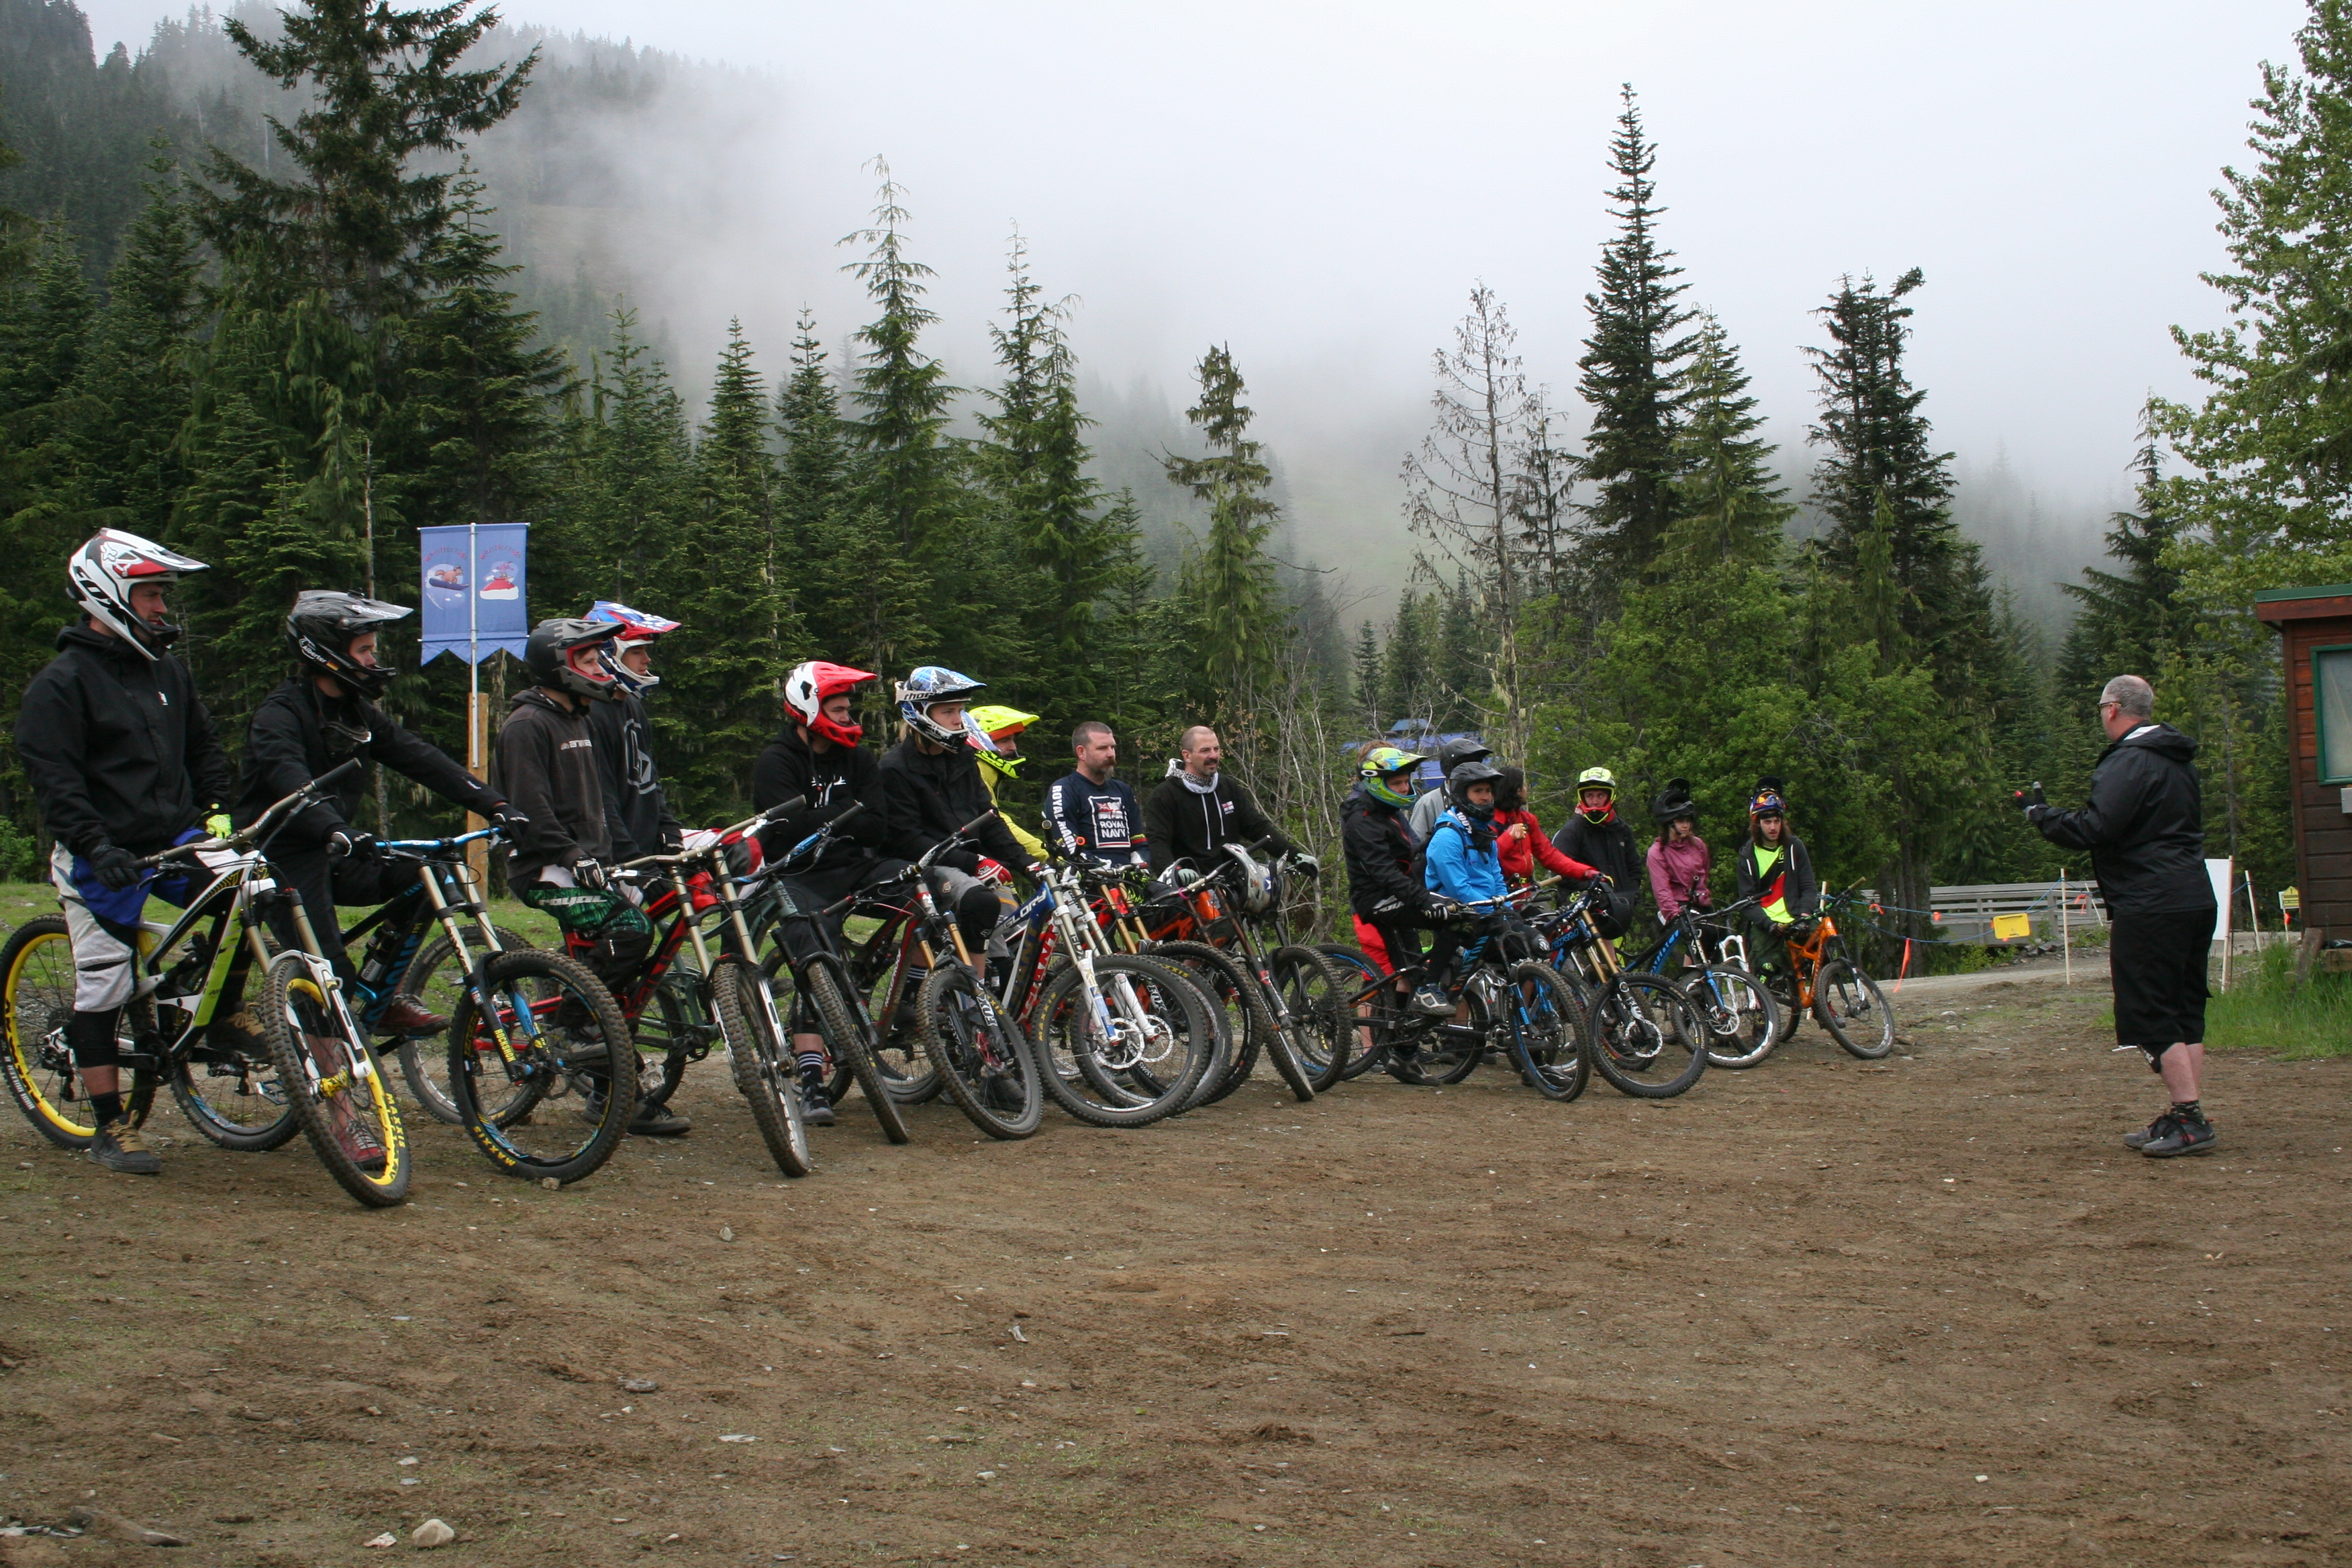 Mike from Terramethod begins the Bike Limbo game at the Skills Centre with the Qualified Whistler Mountain Bike Guides